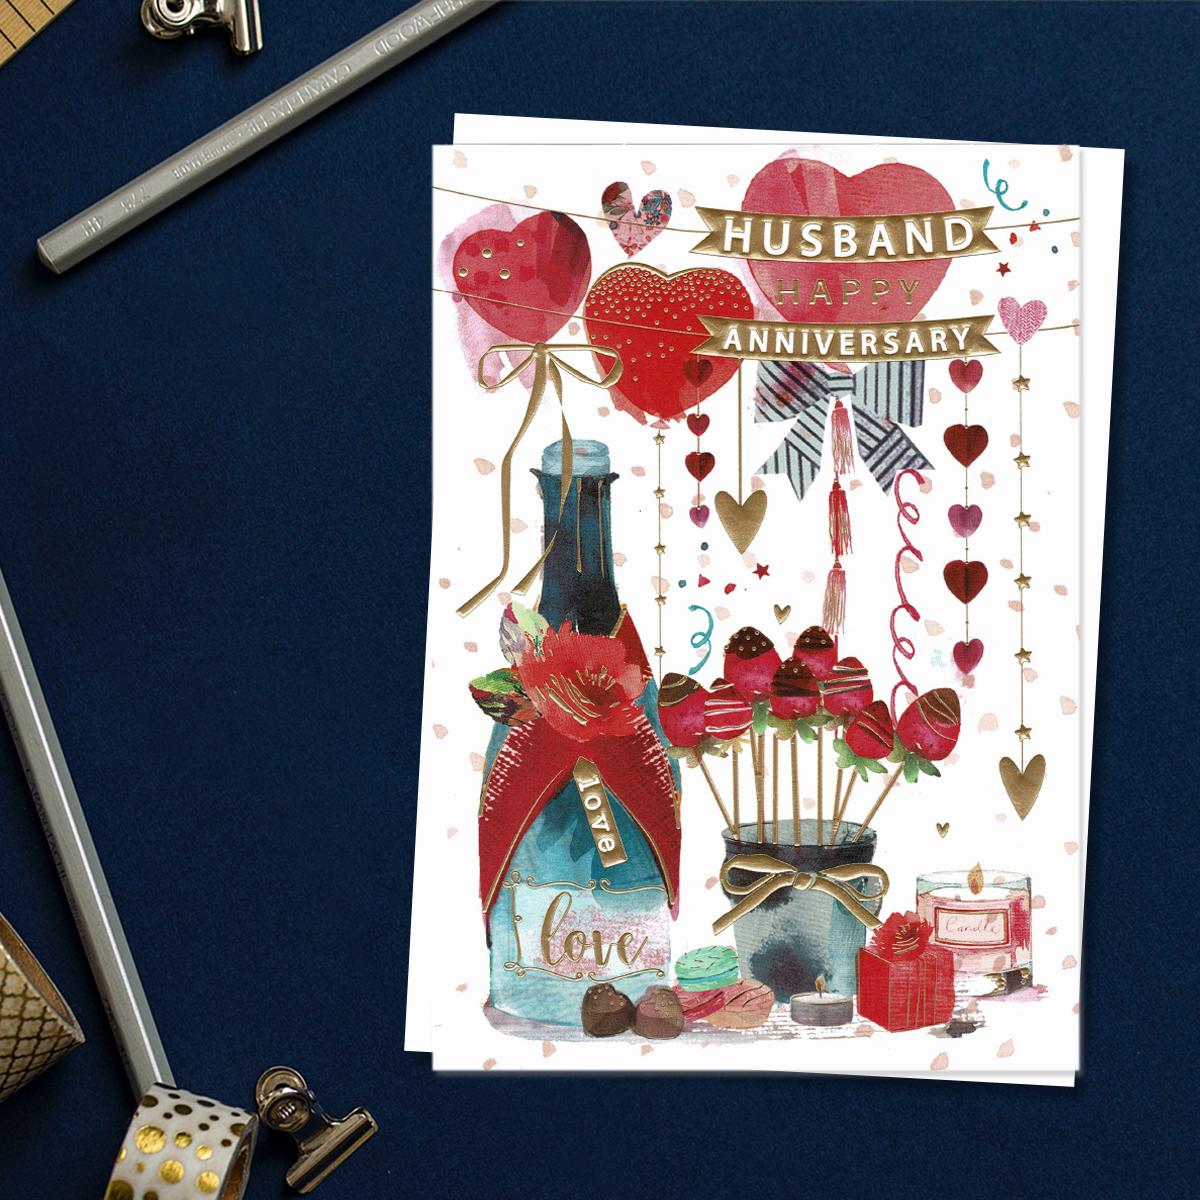 ' Husband Happy Anniversary' Card Featuring Balloons, Champagne, Dipped Strawberries And Gifts! Enhanced With Gold Foil Detail And Complete With White Envelope